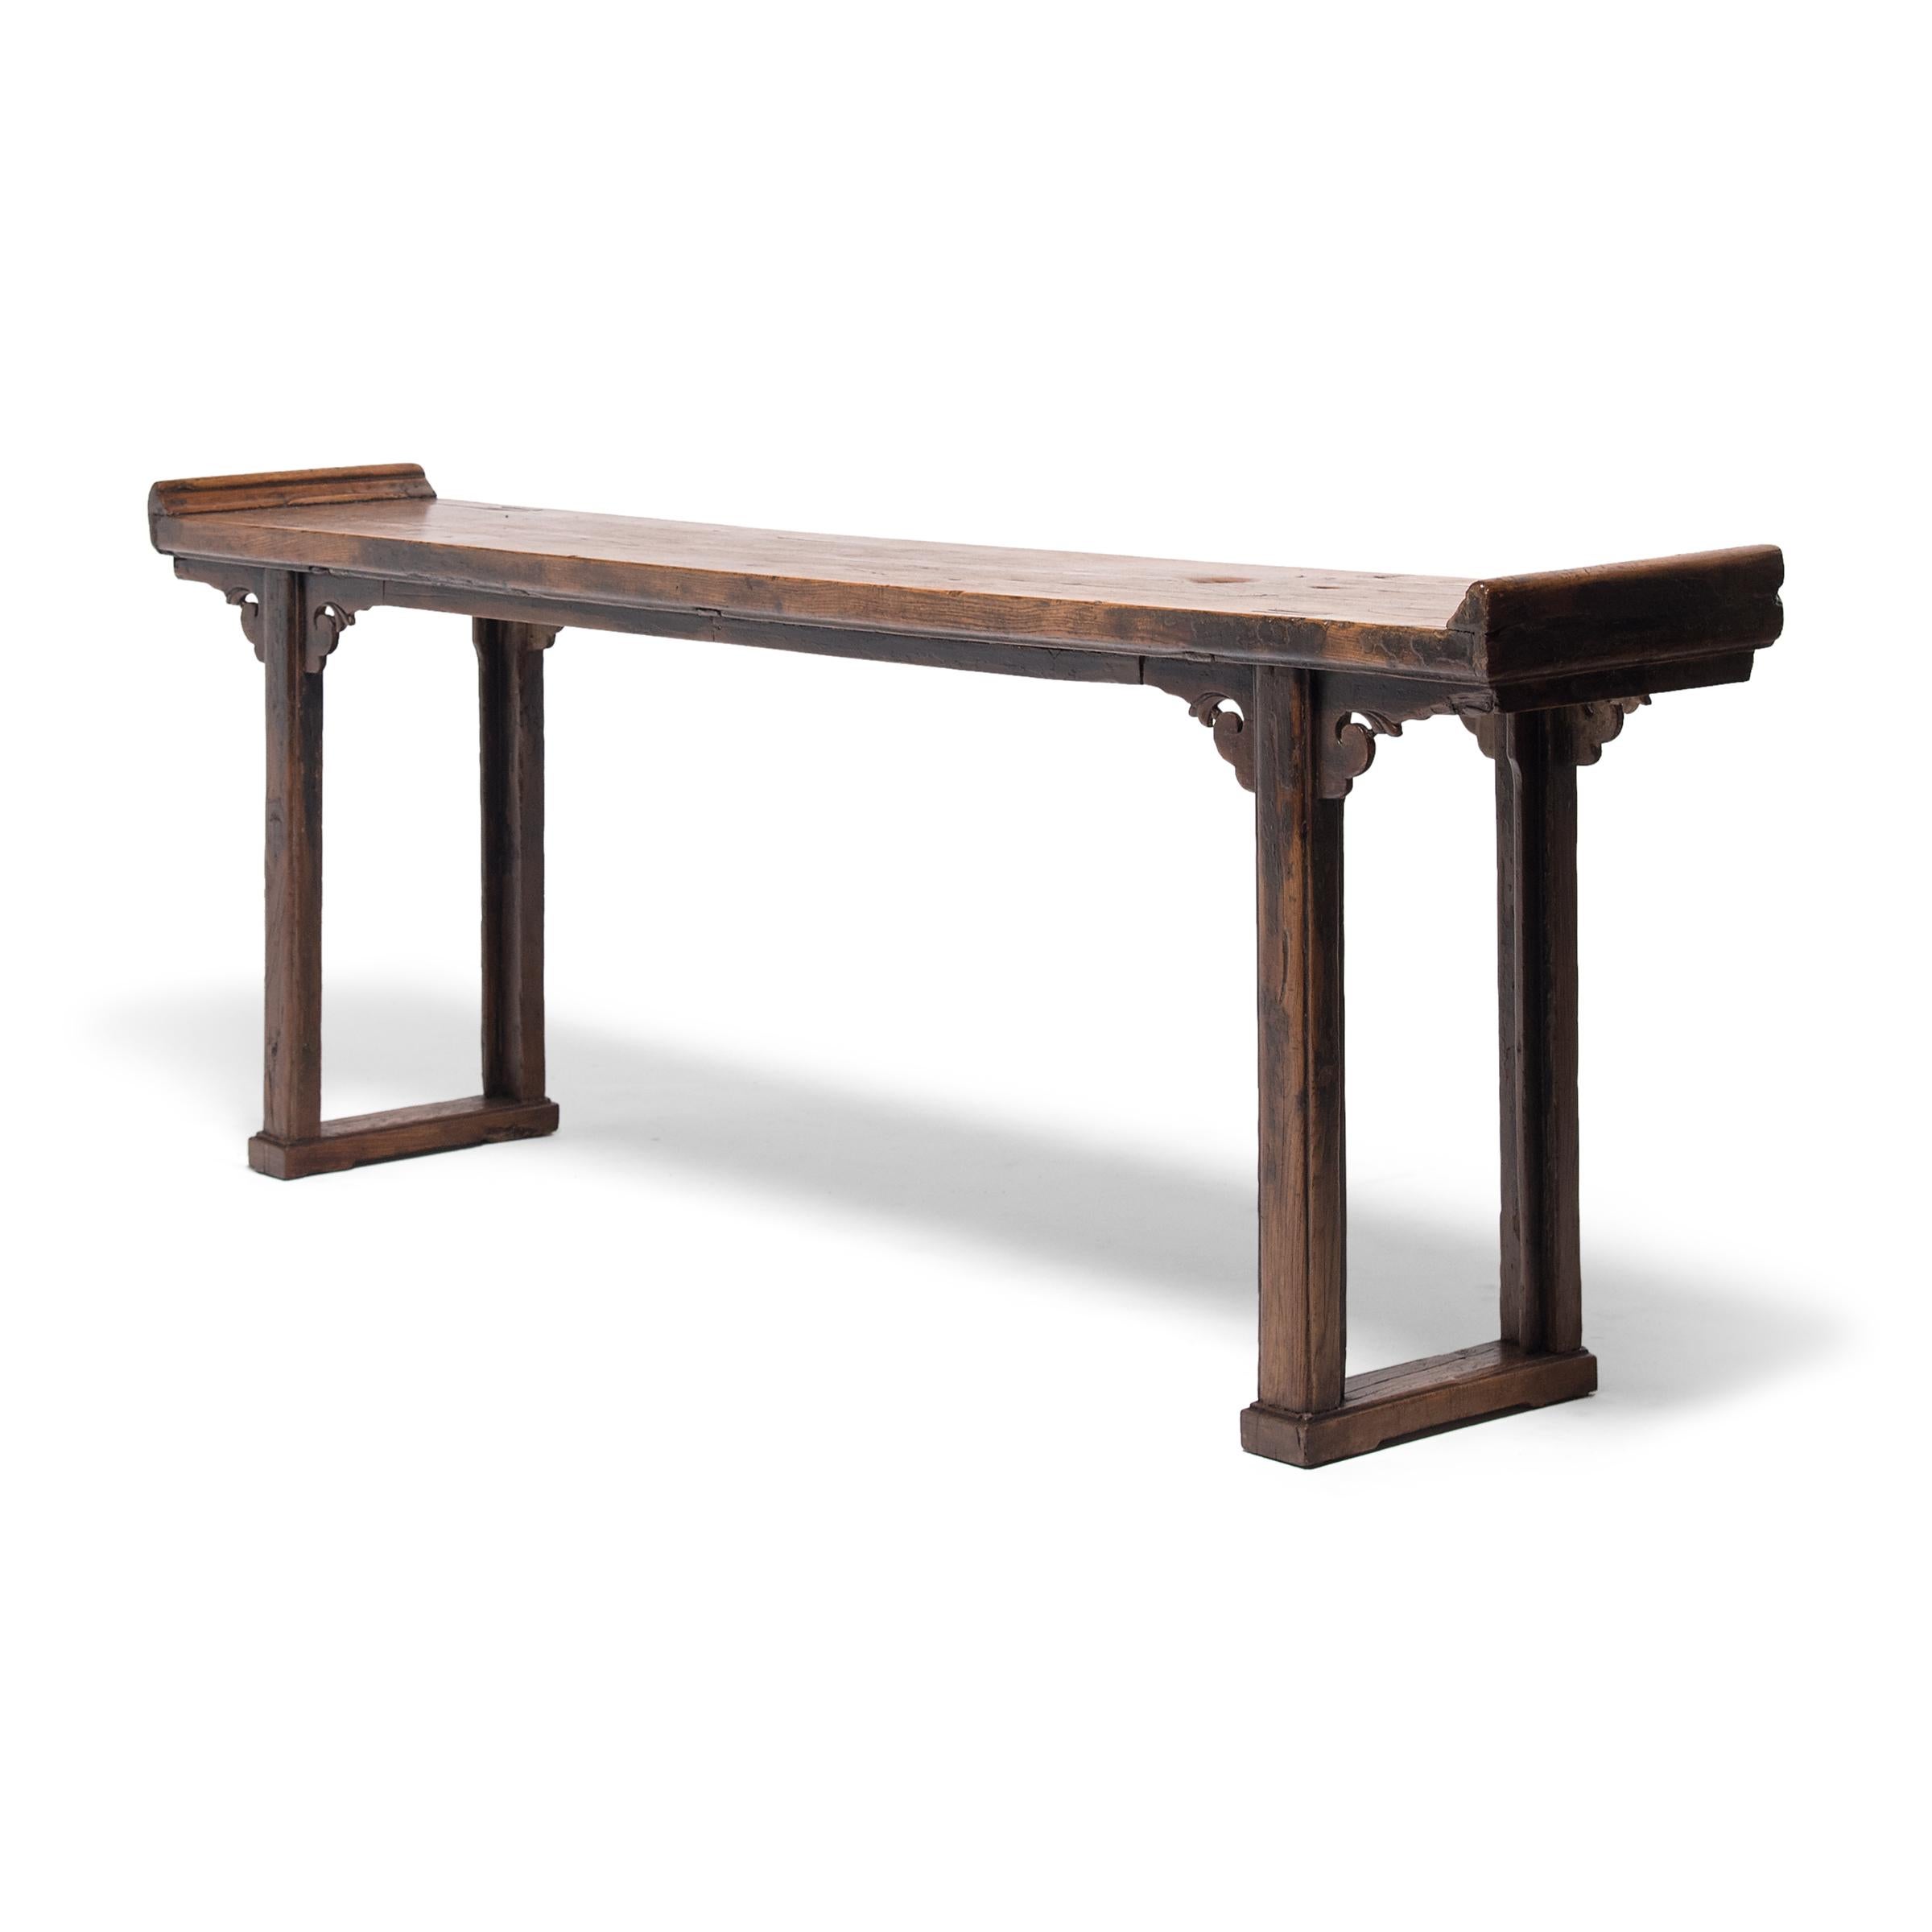 Qing Chinese Plank Top Altar Table, circa 1800